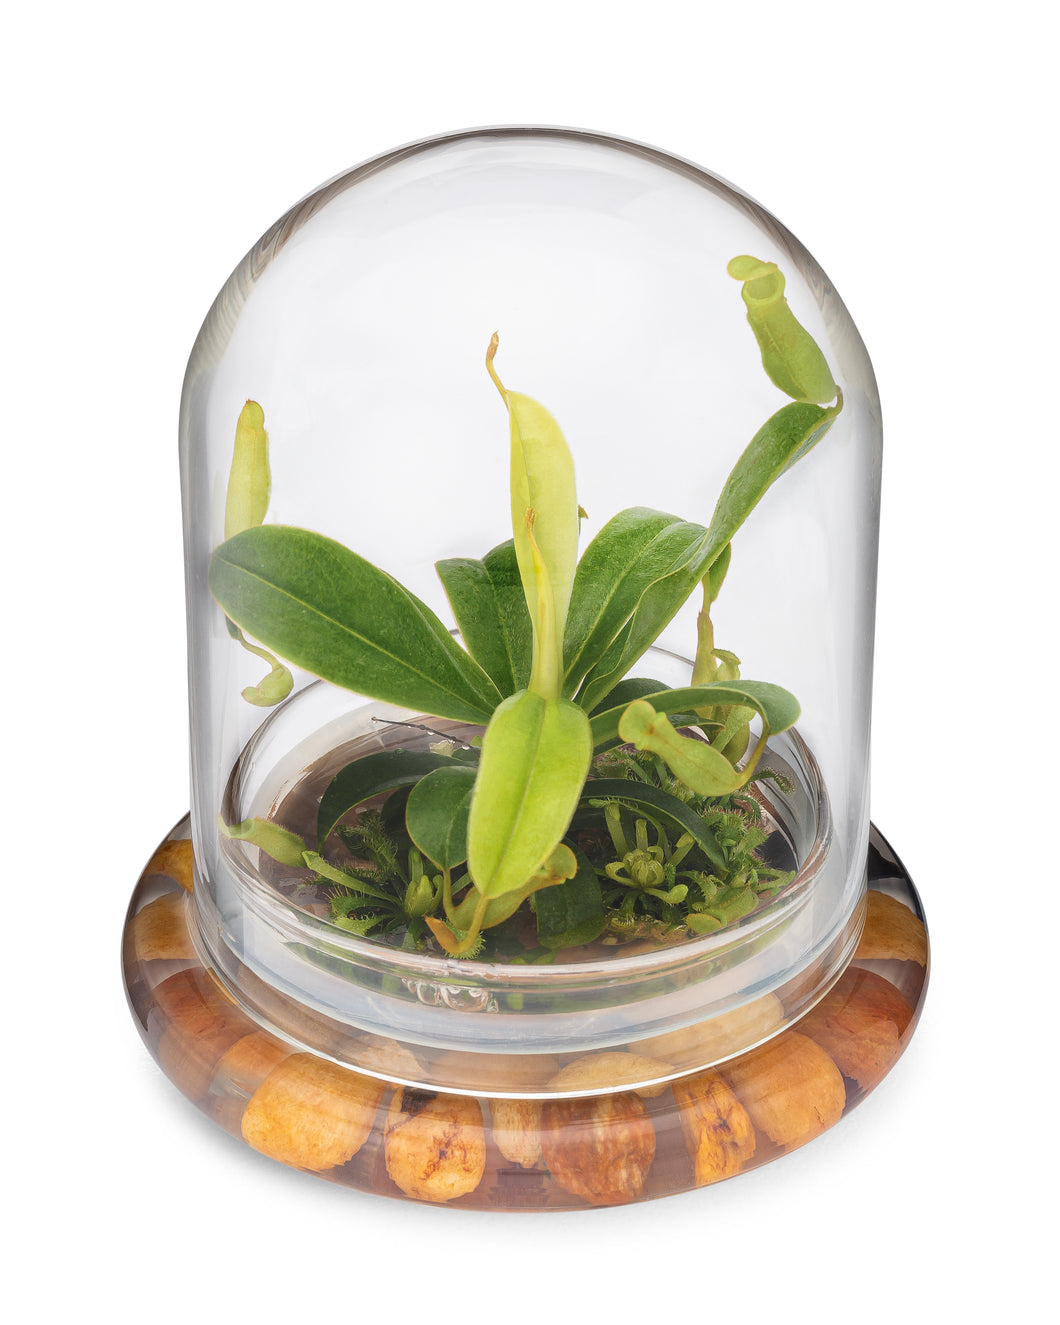 Live Pitcher Plant Terrarium, Nepenthes Tobaica with Moss, Must-have Home Décor